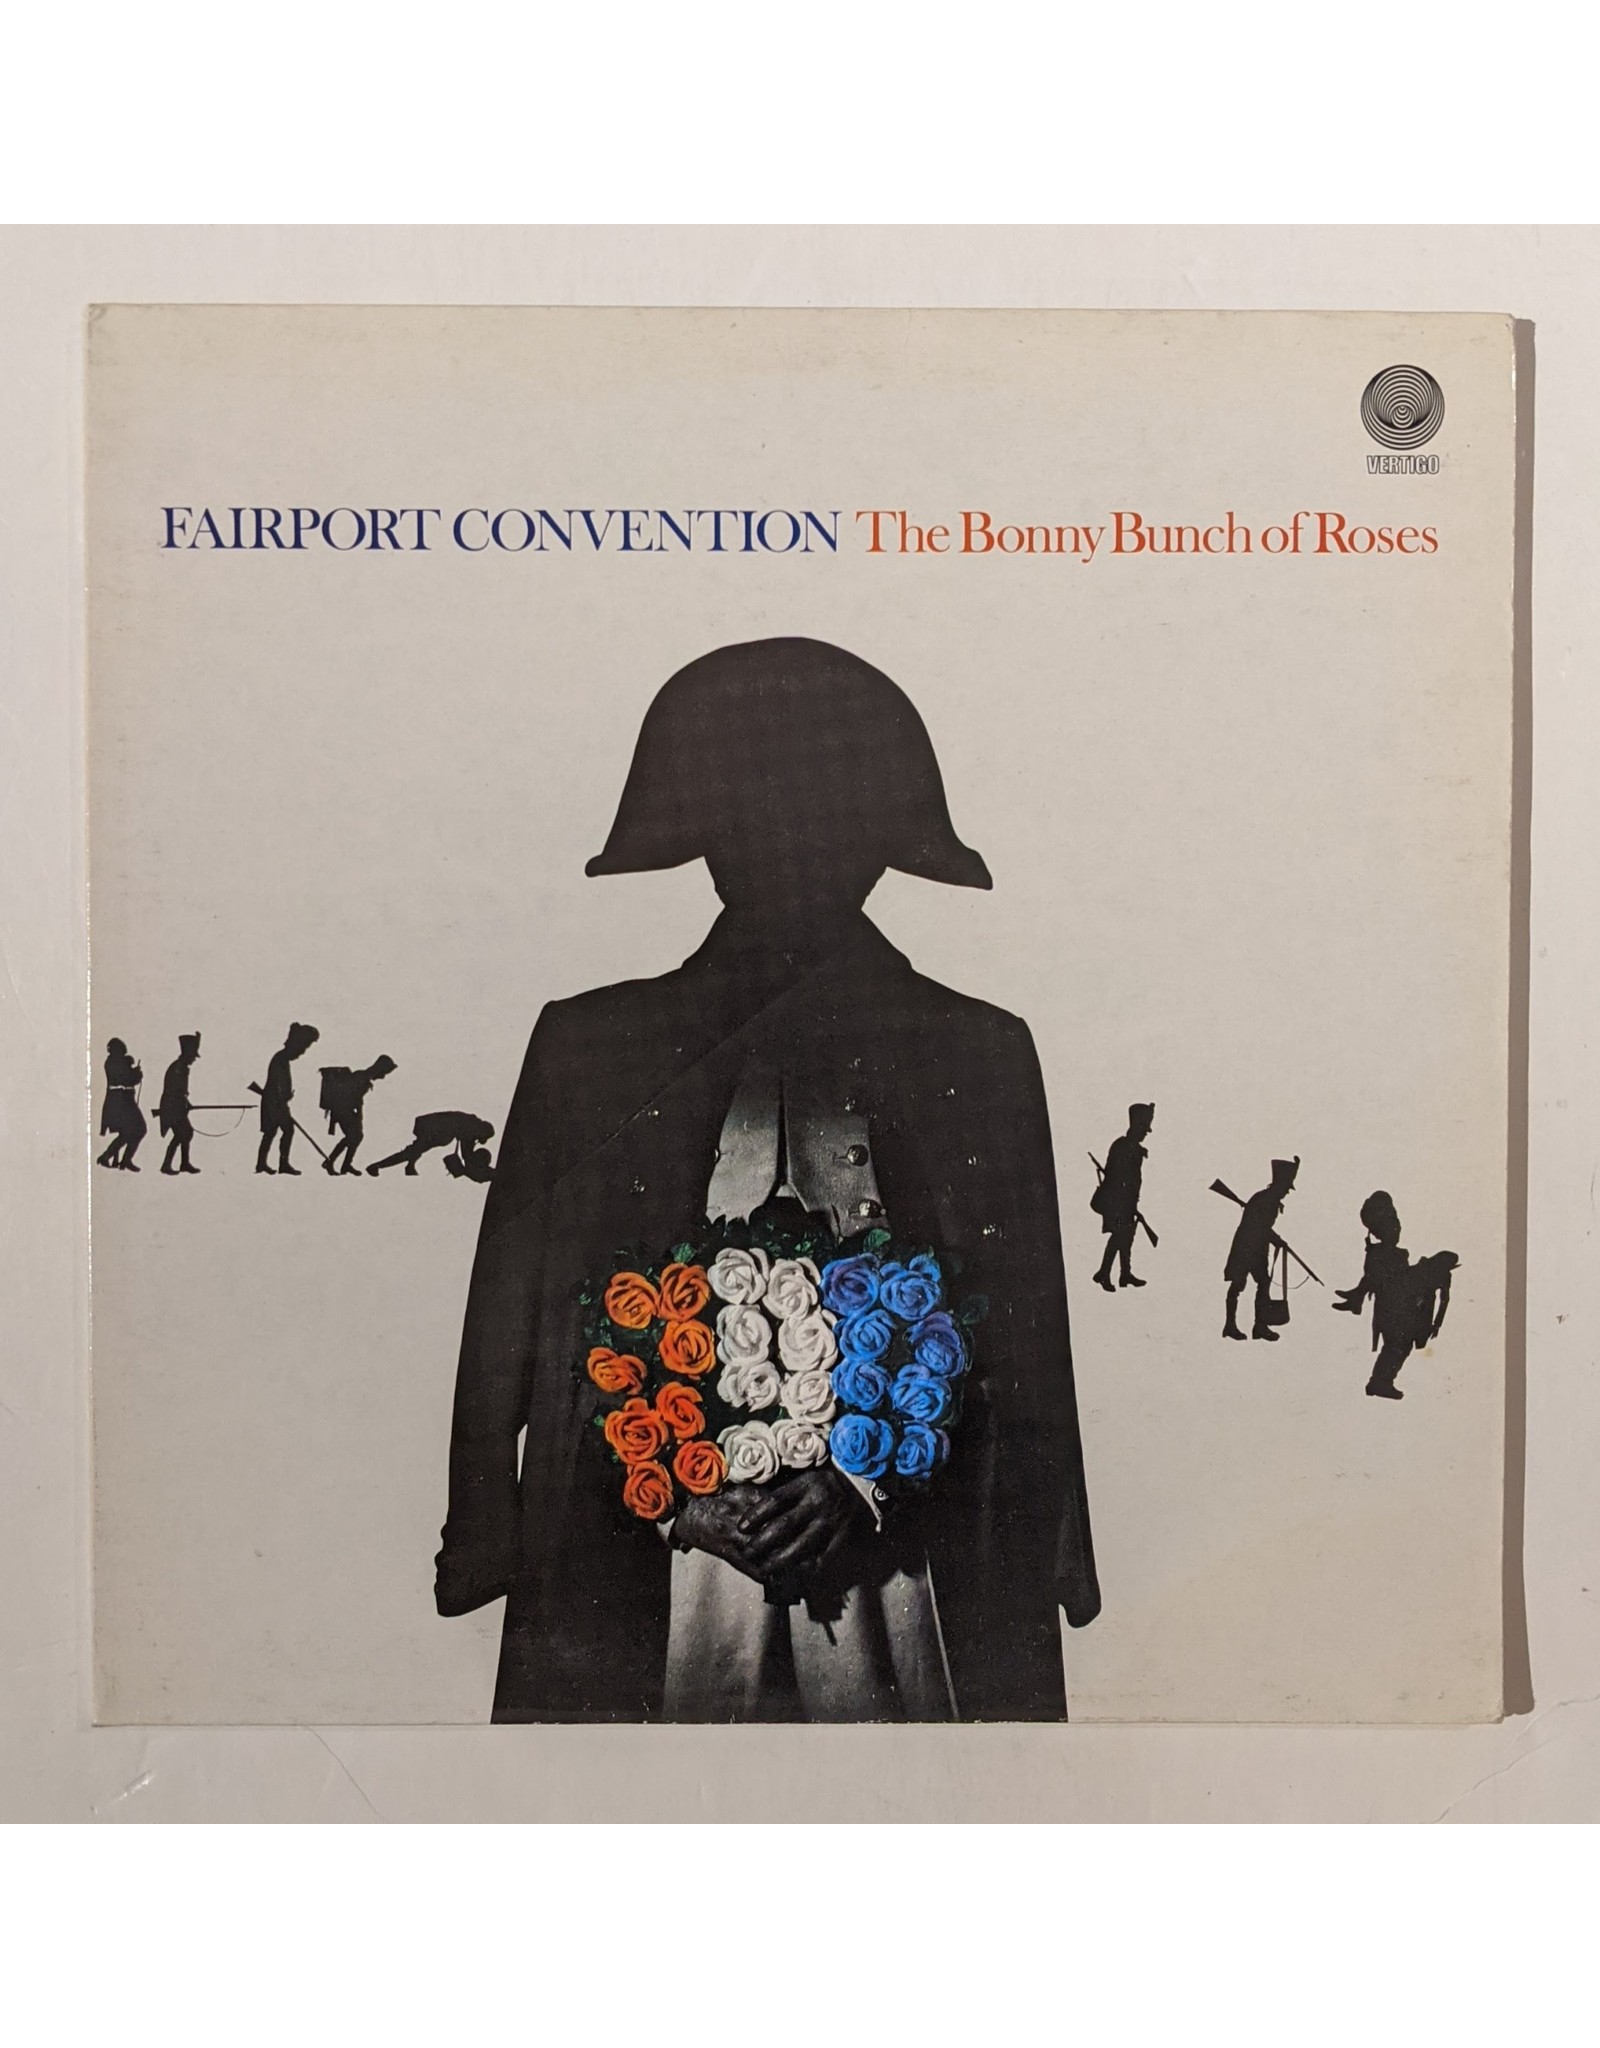 USED: Fairport Convention: The Bonny Bunch of Roses LP